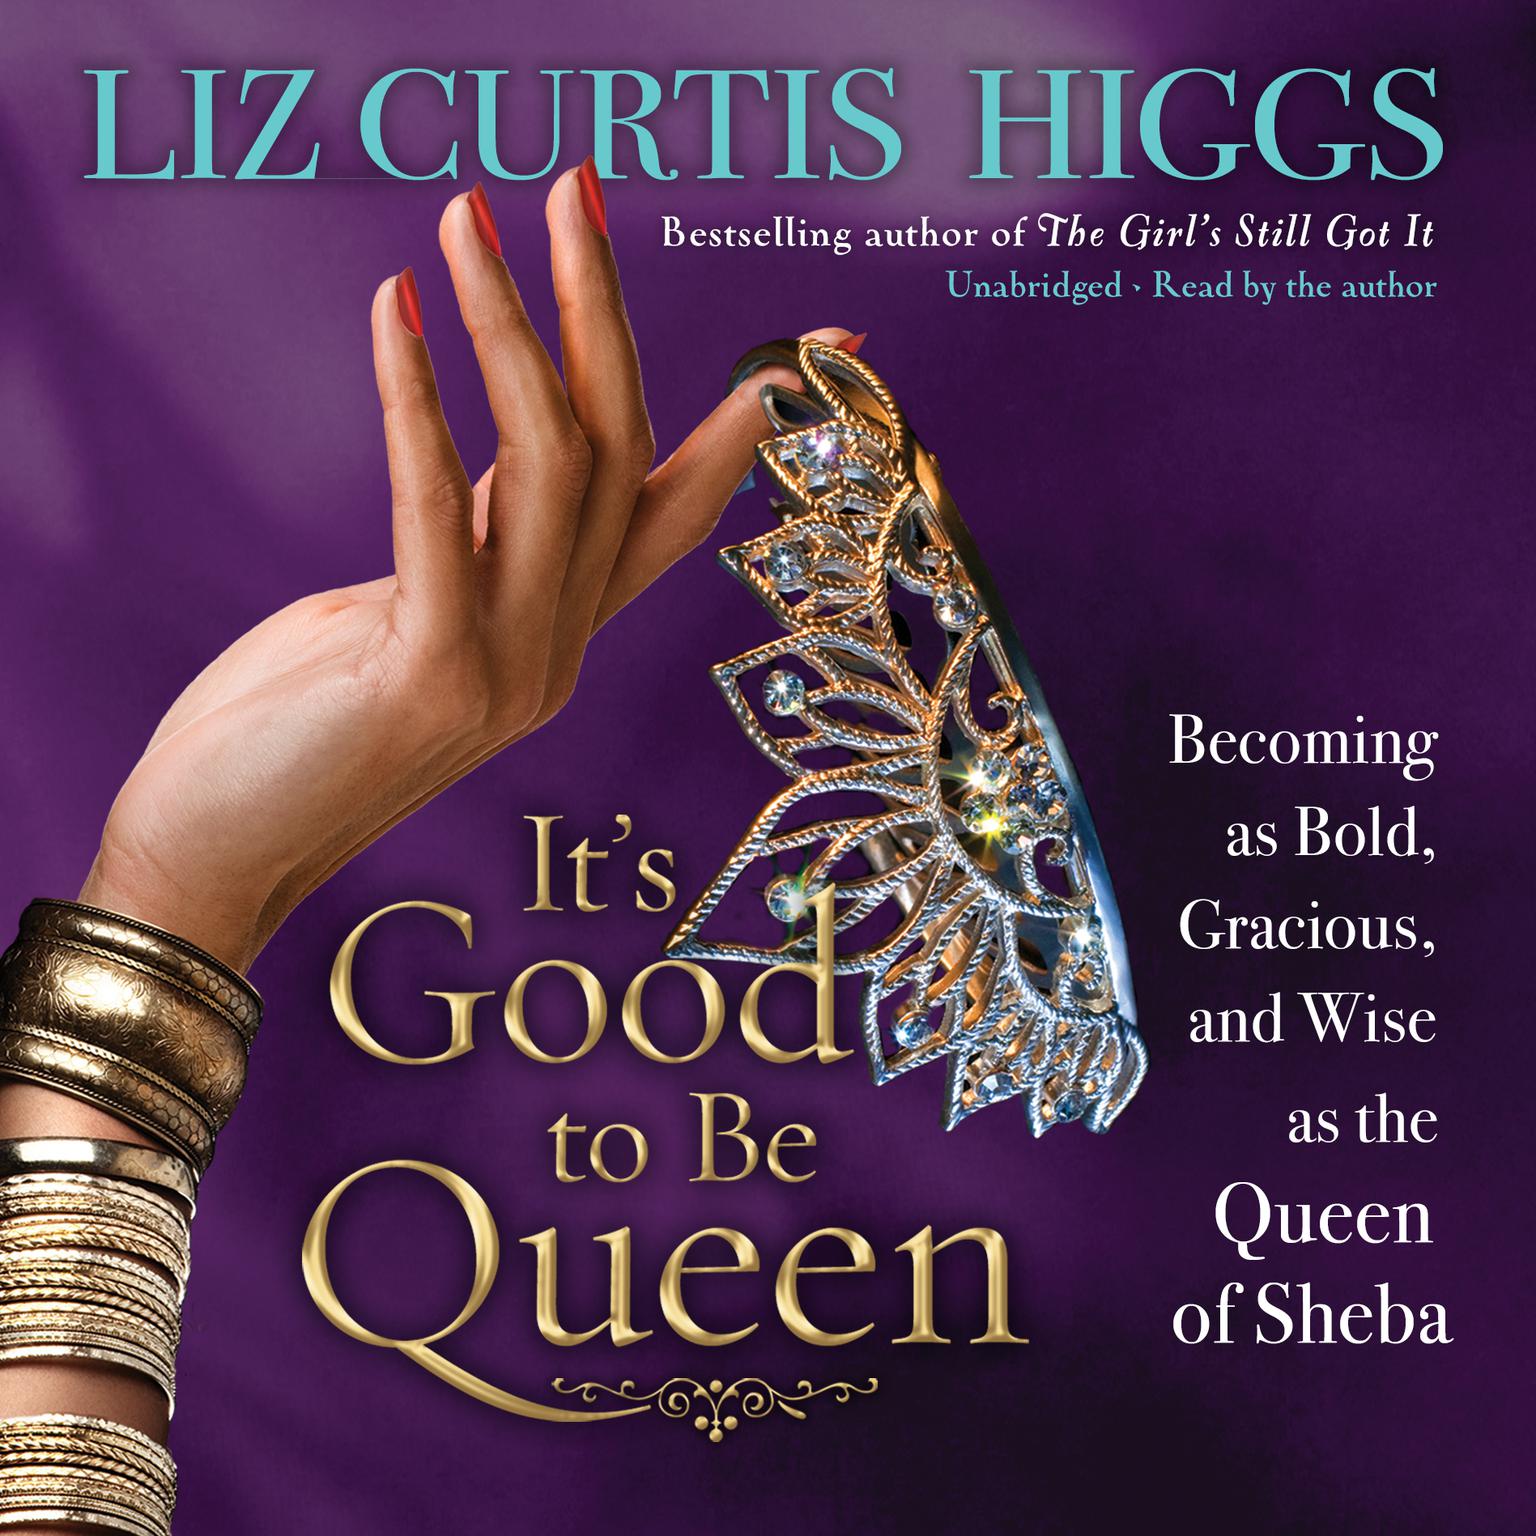 Its Good to Be Queen: Becoming as Bold, Gracious, and Wise as the Queen of Sheba Audiobook, by Liz Curtis Higgs